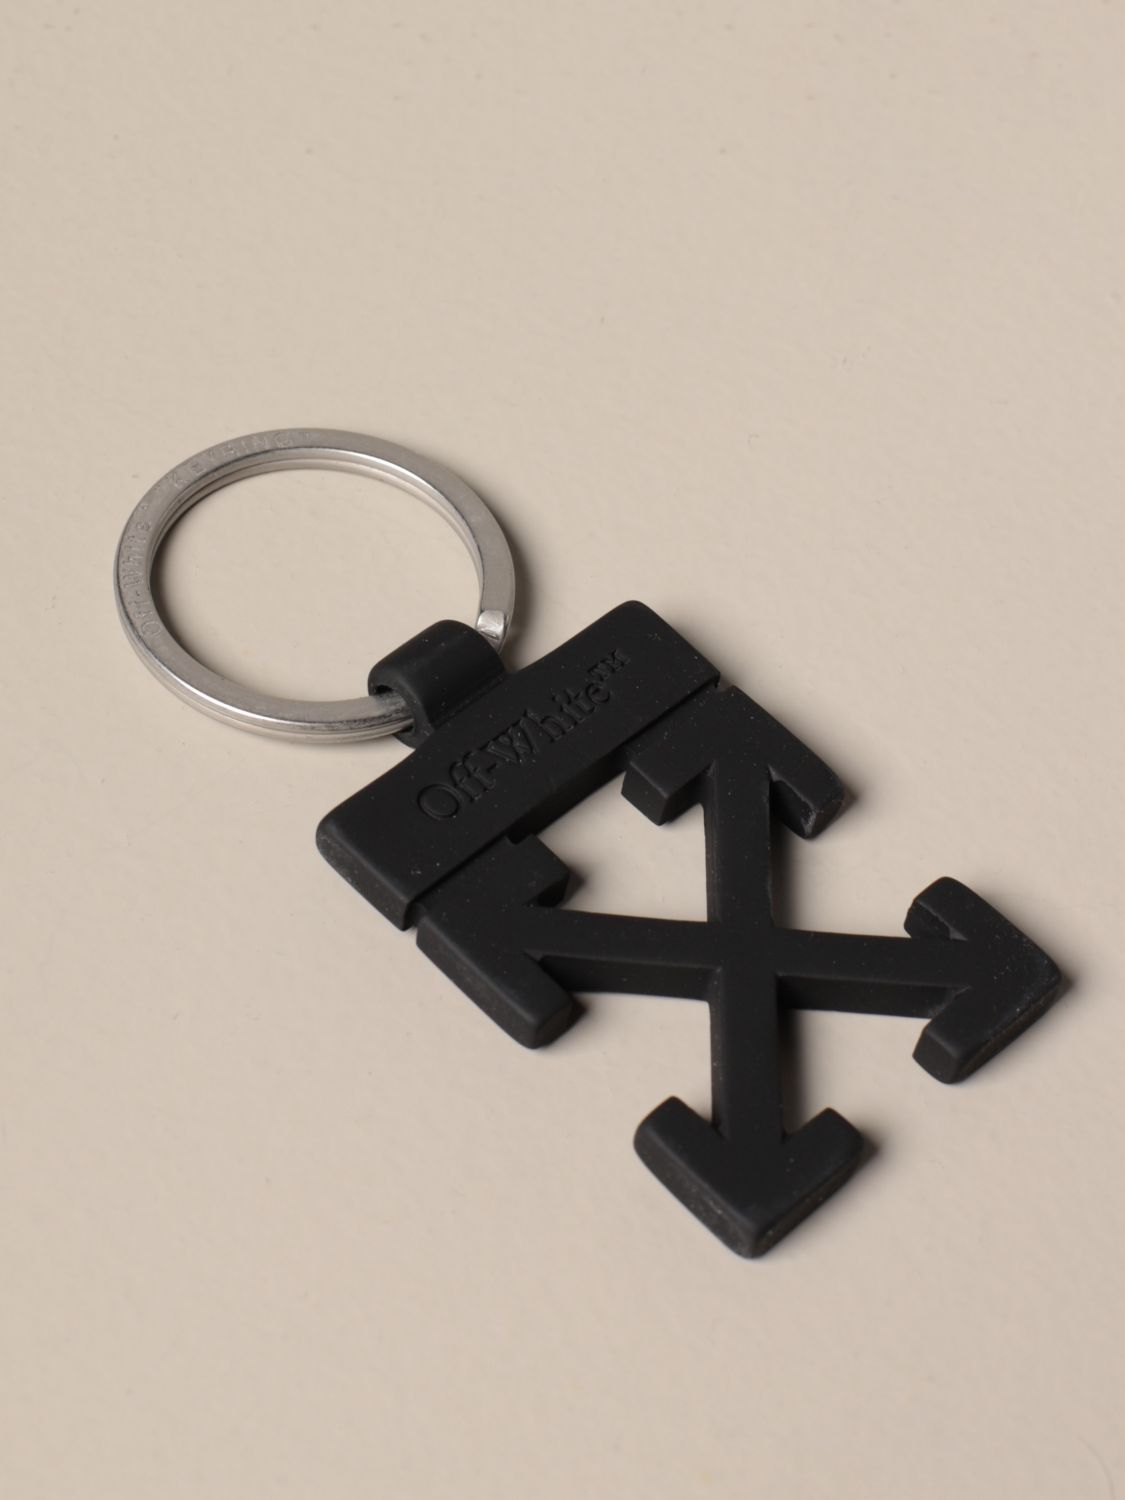 OFF-WHITE: Off White keychain in the shape of arrows - Blue